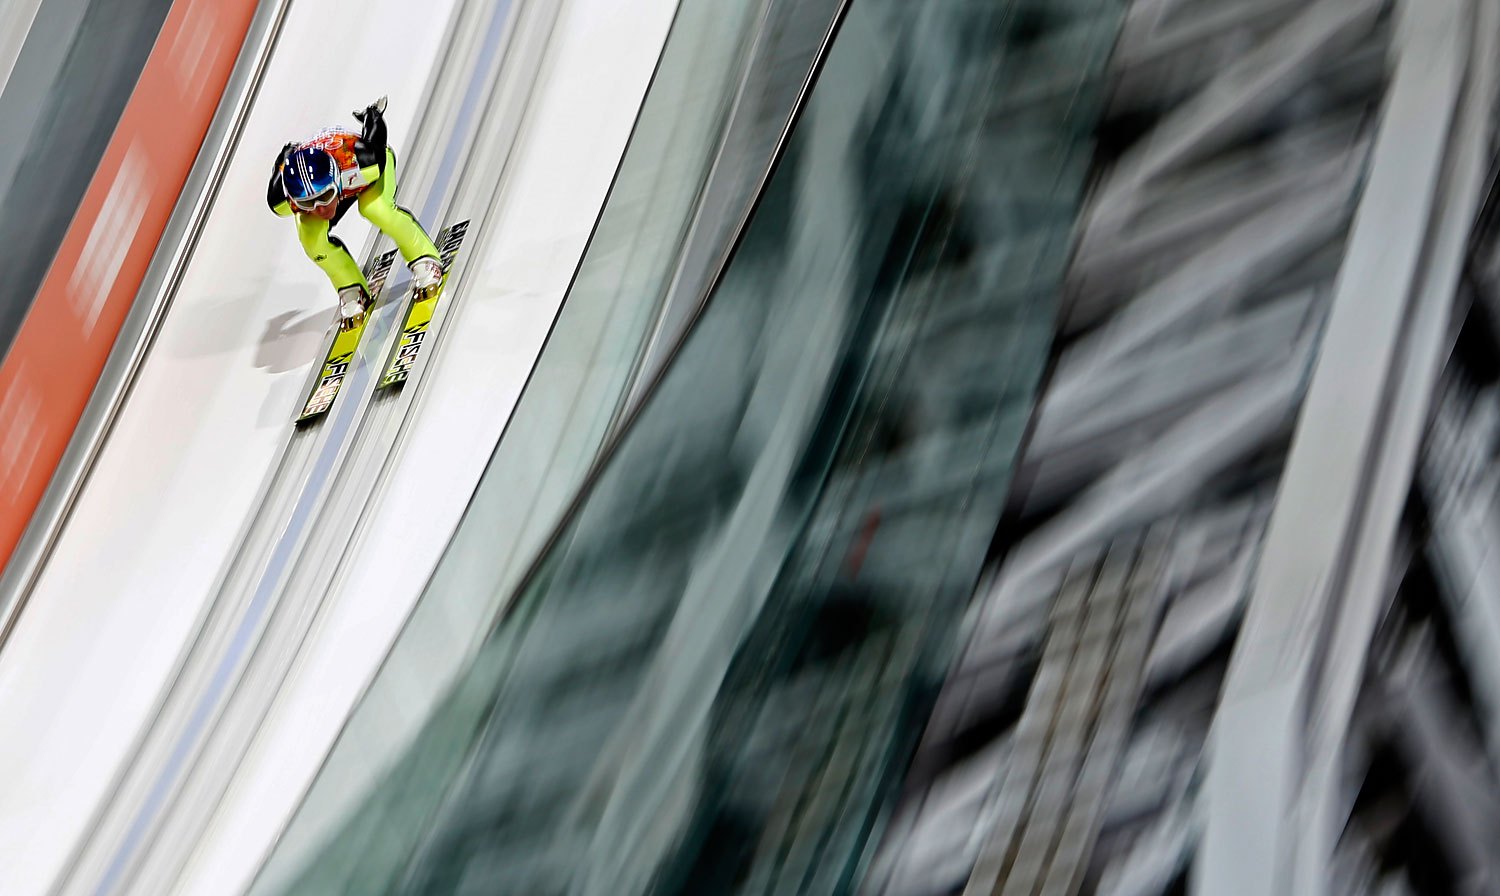 Germany's Severin Freund speeds down the ski jump in his trial jump of the men's ski jumping normal hill individual final event at the RusSki Gorki Ski Jumping Center in Rosa Khutor, Feb. 9, 2014.